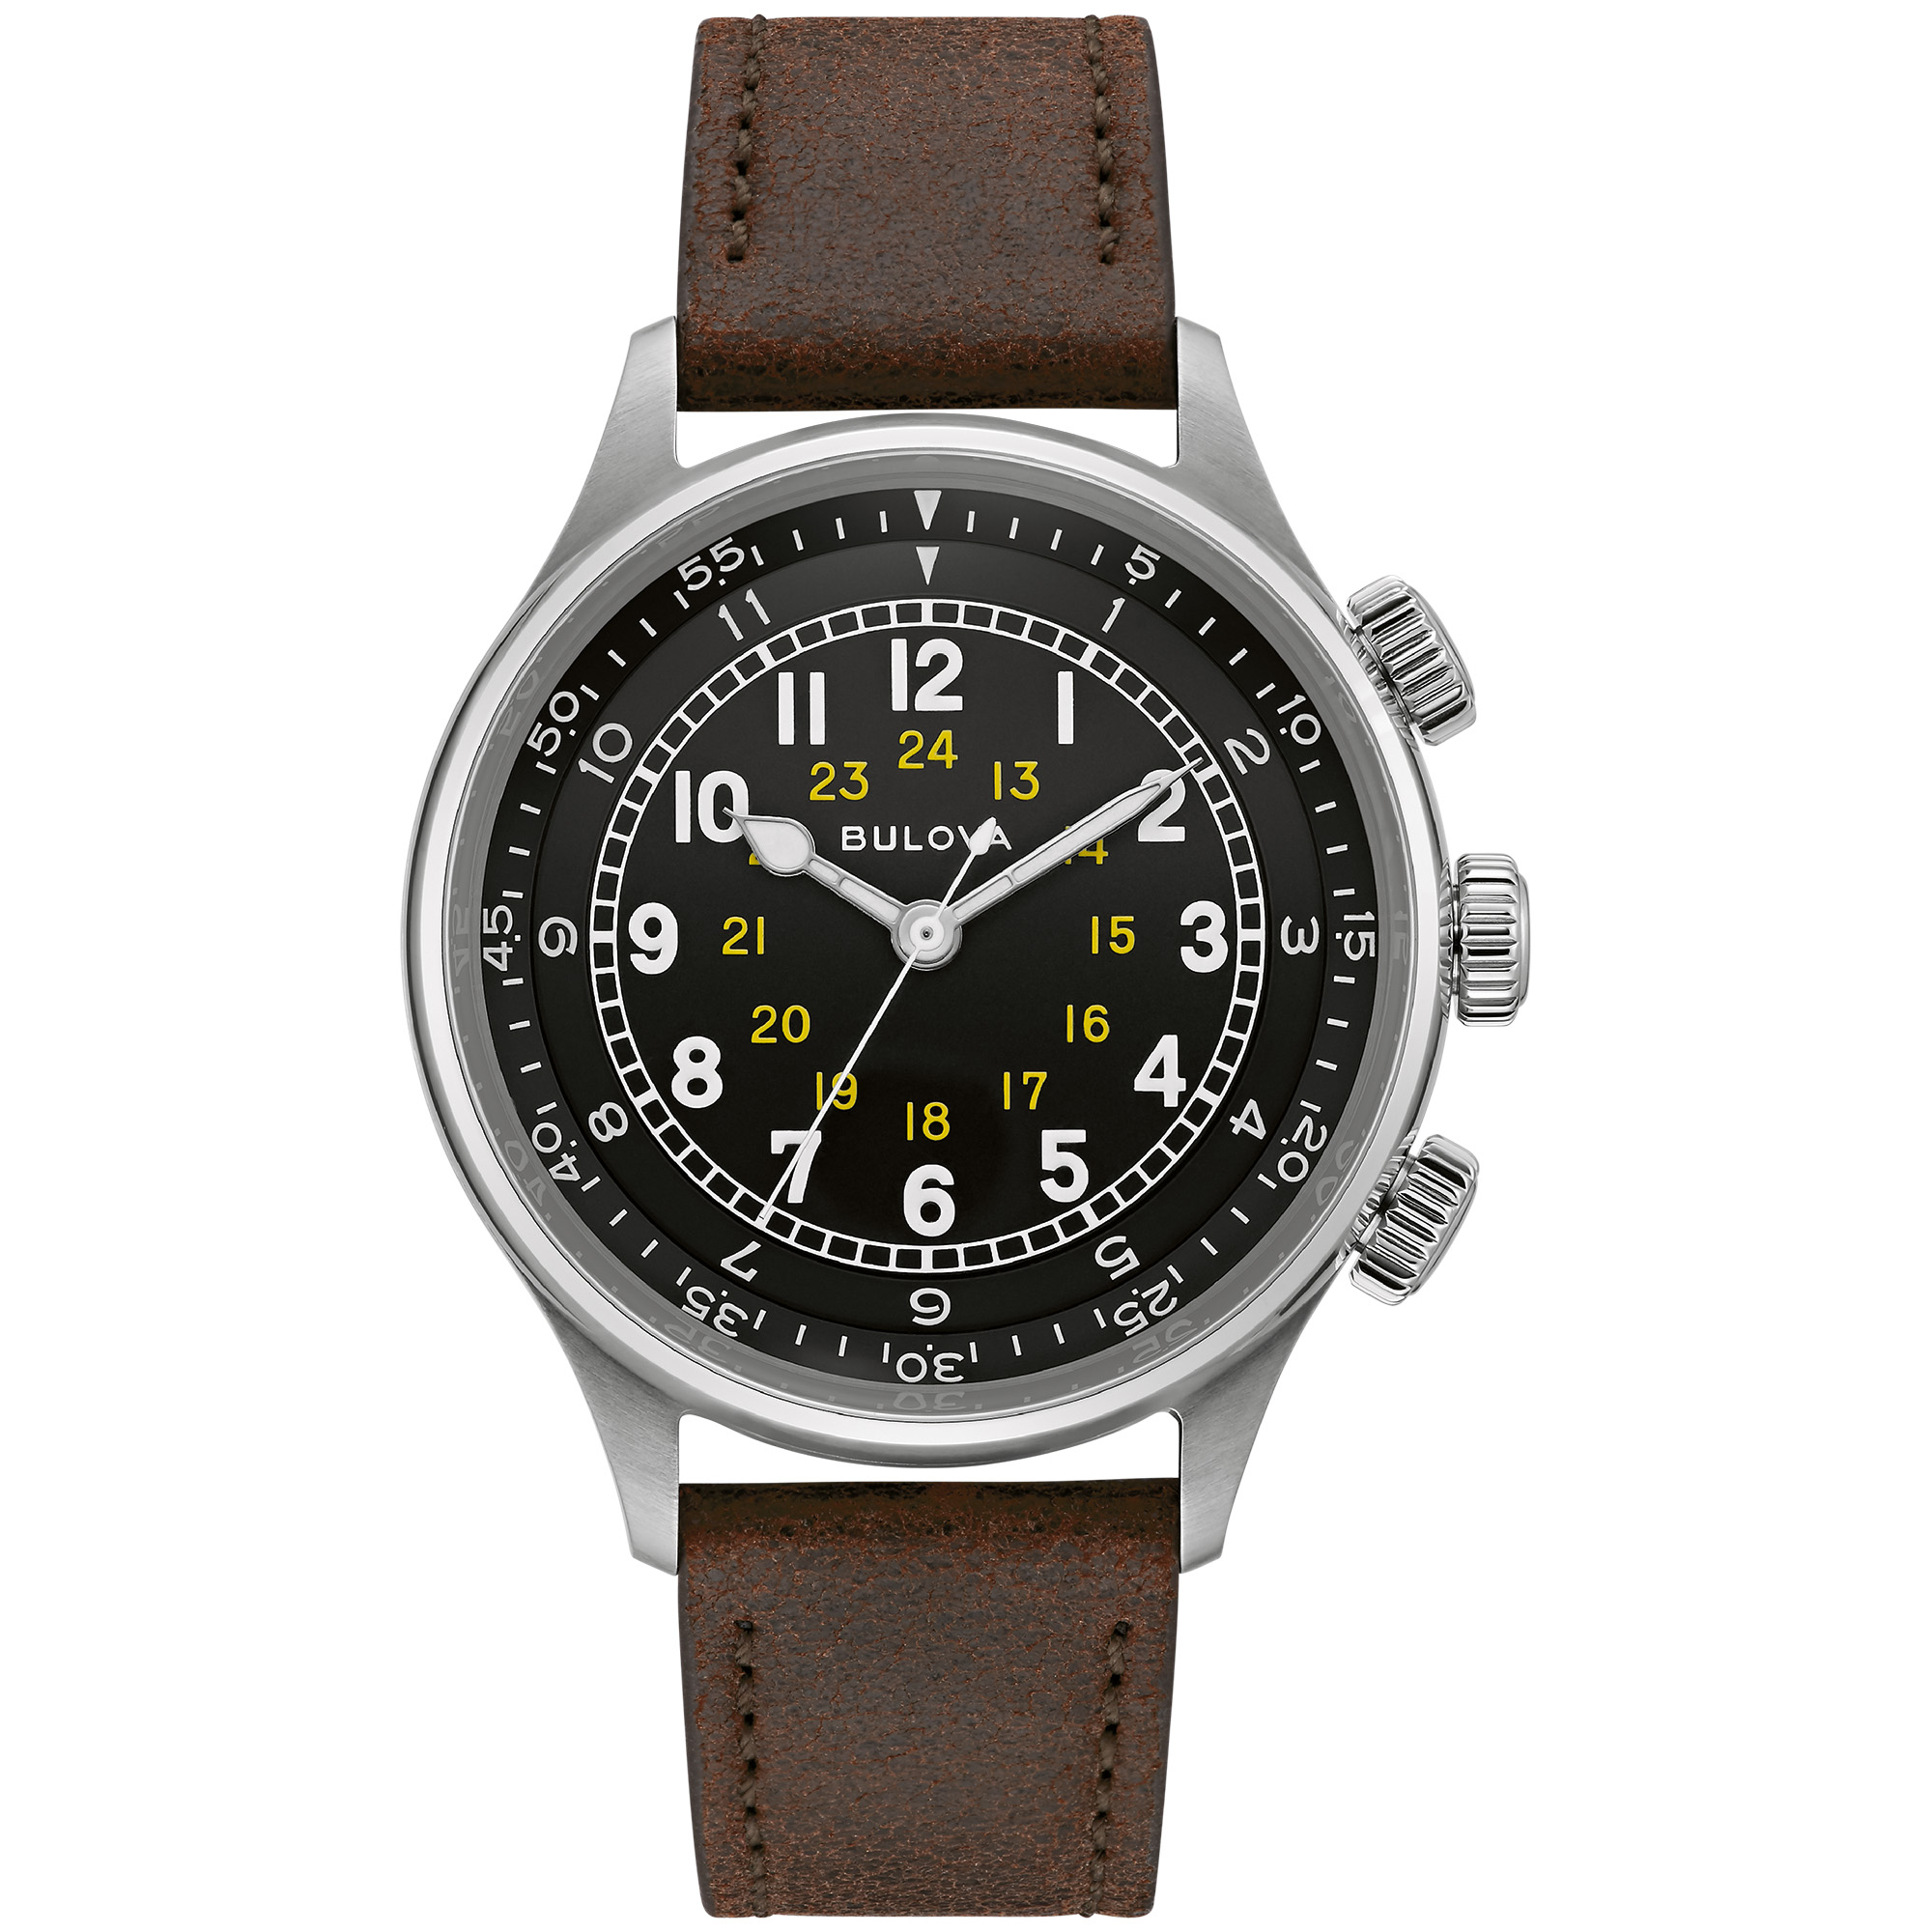 Bulova Revisits A WWII Classic With The New A-15 Pilot Watch